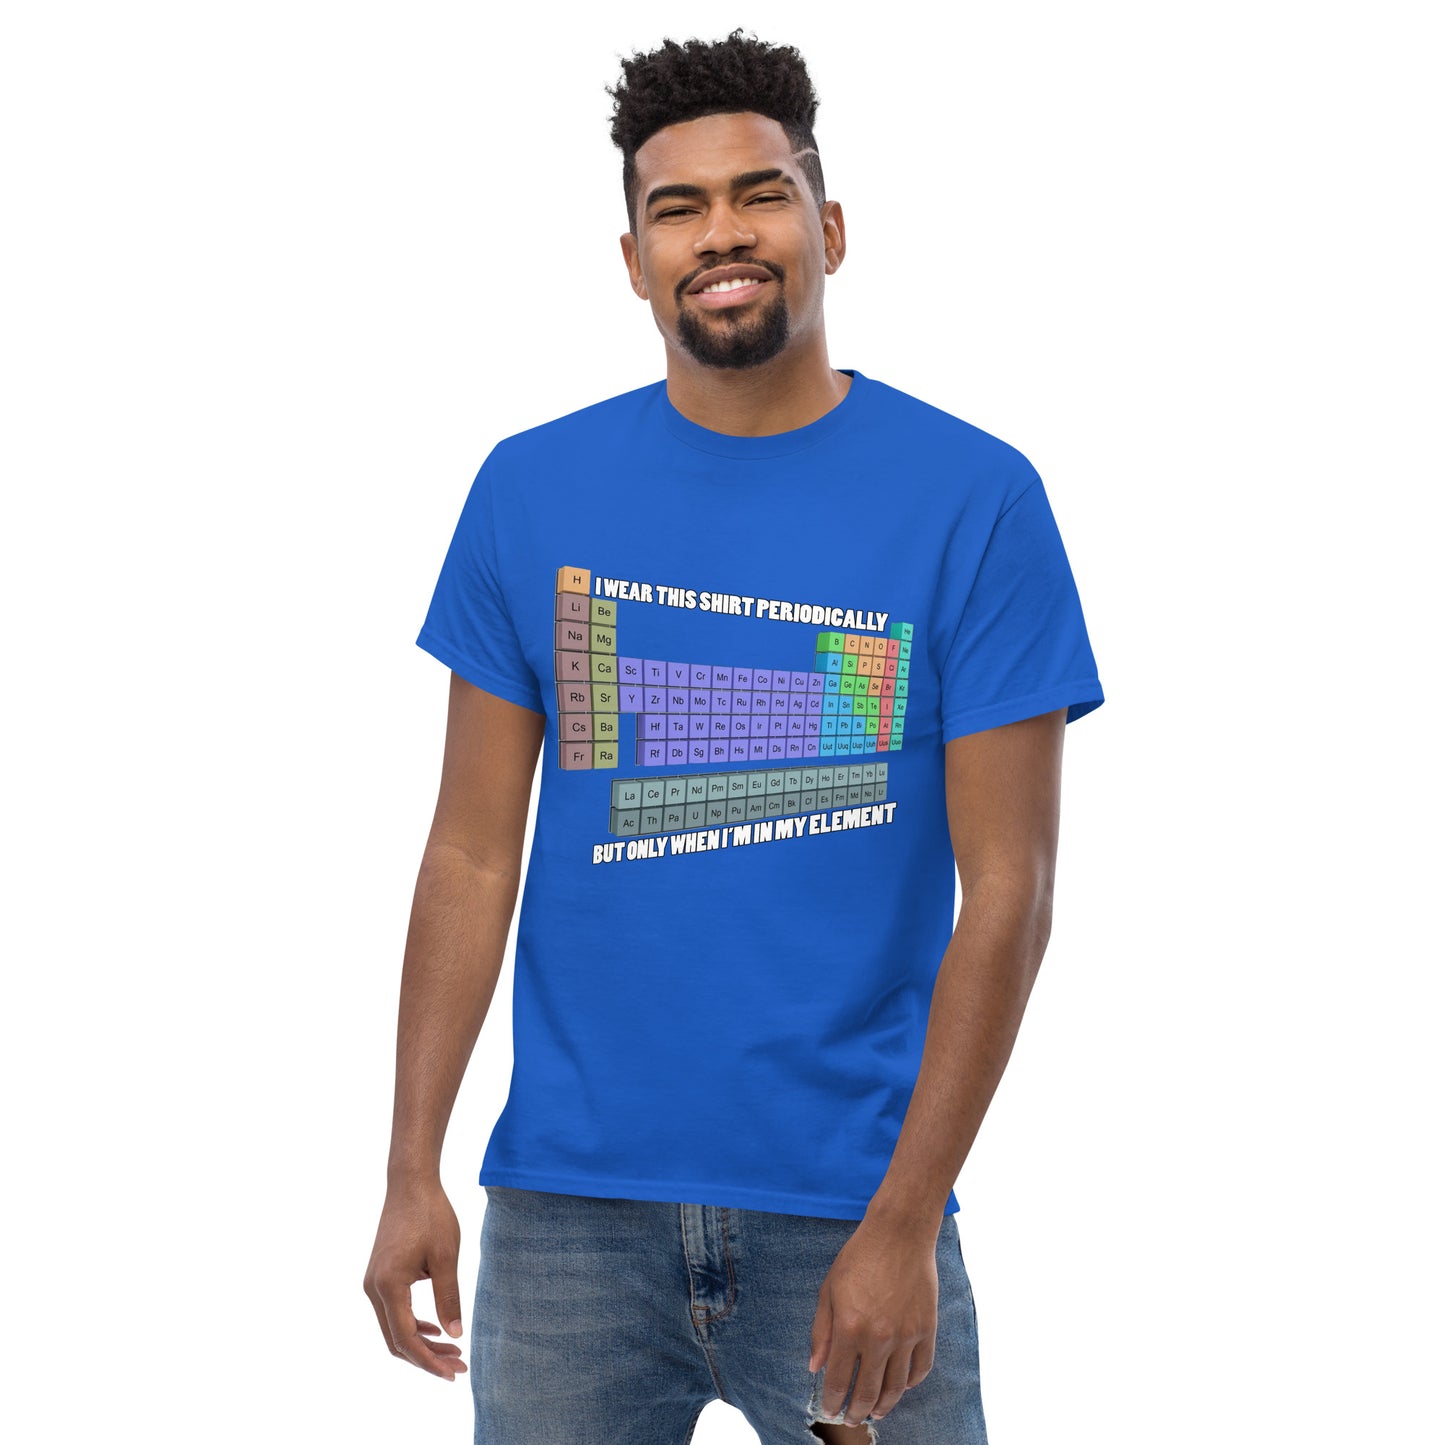 Man with royal blue t-shirt with Mendelev's table